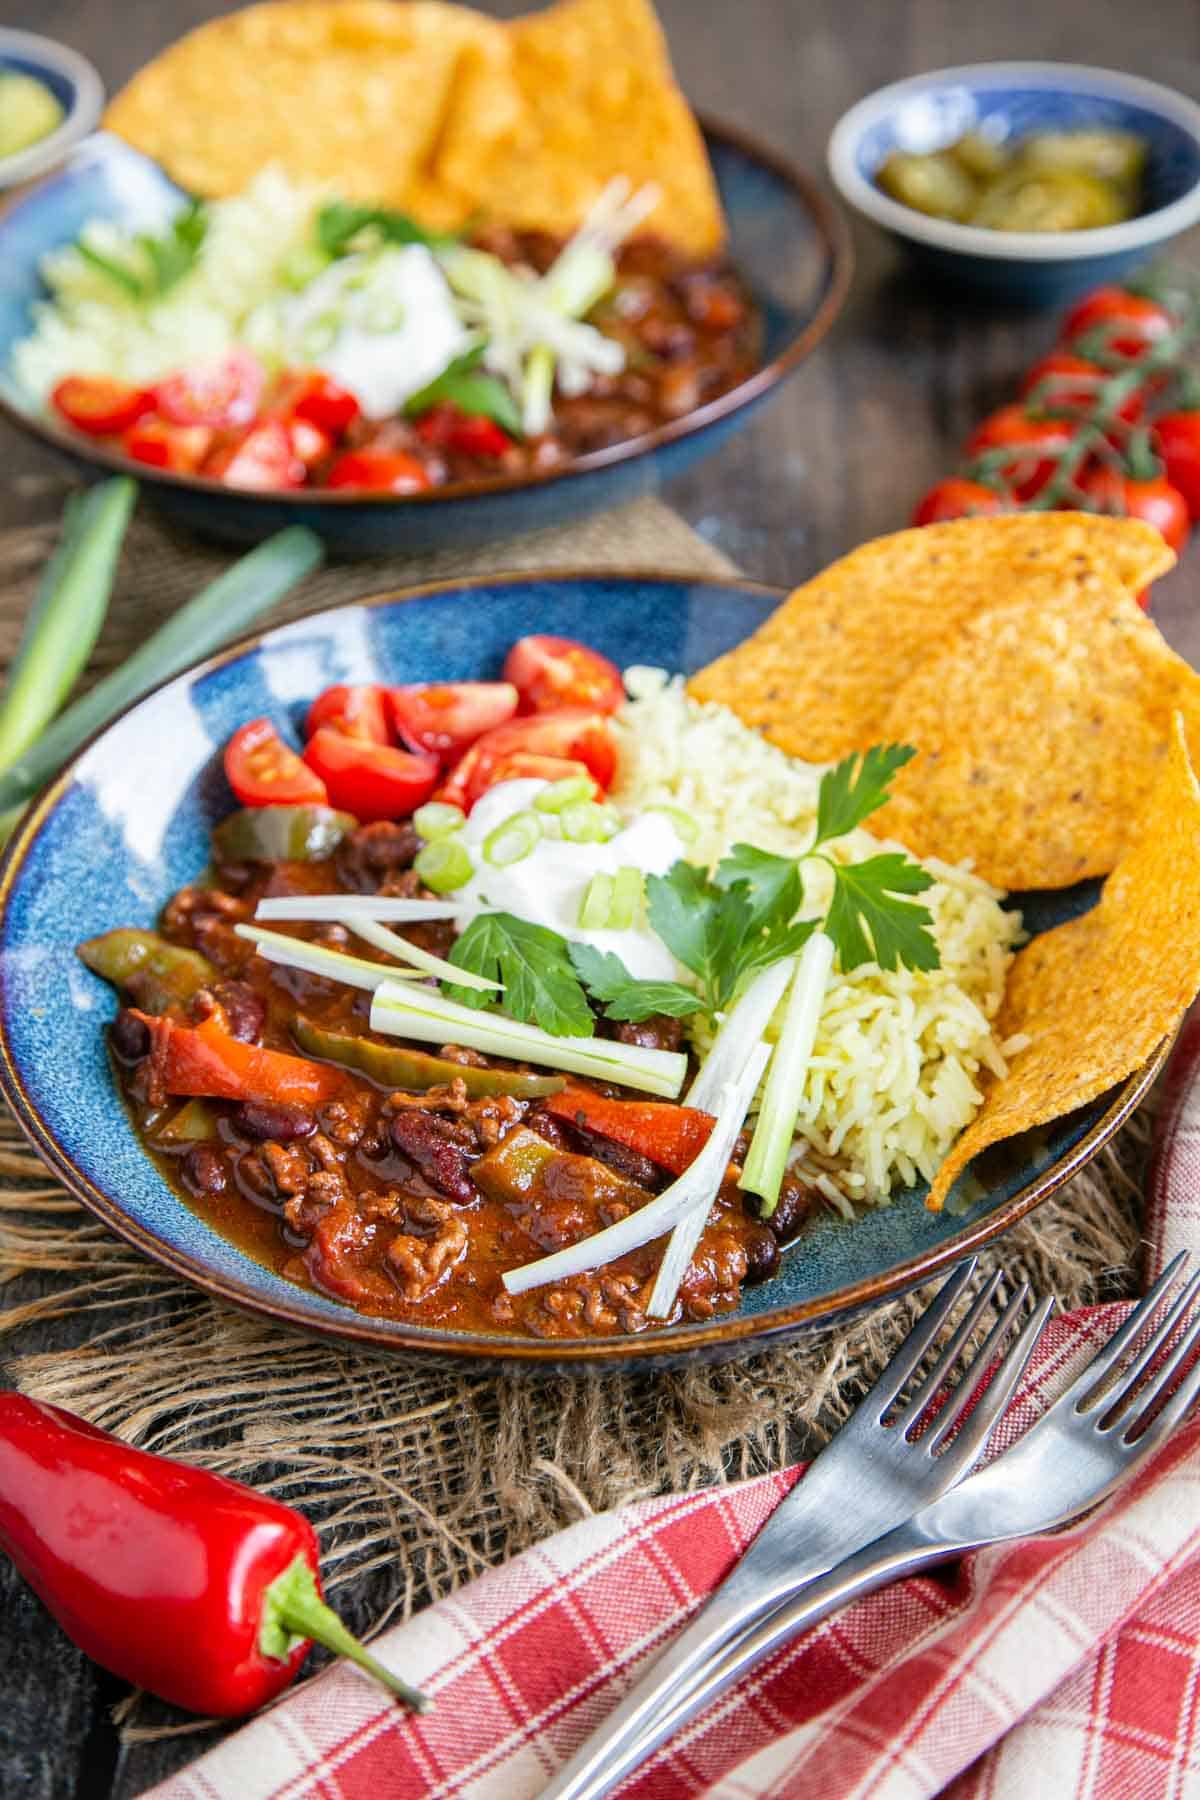 Deliciously dark and warming beef chili served with rice, tacos and salad toppings.